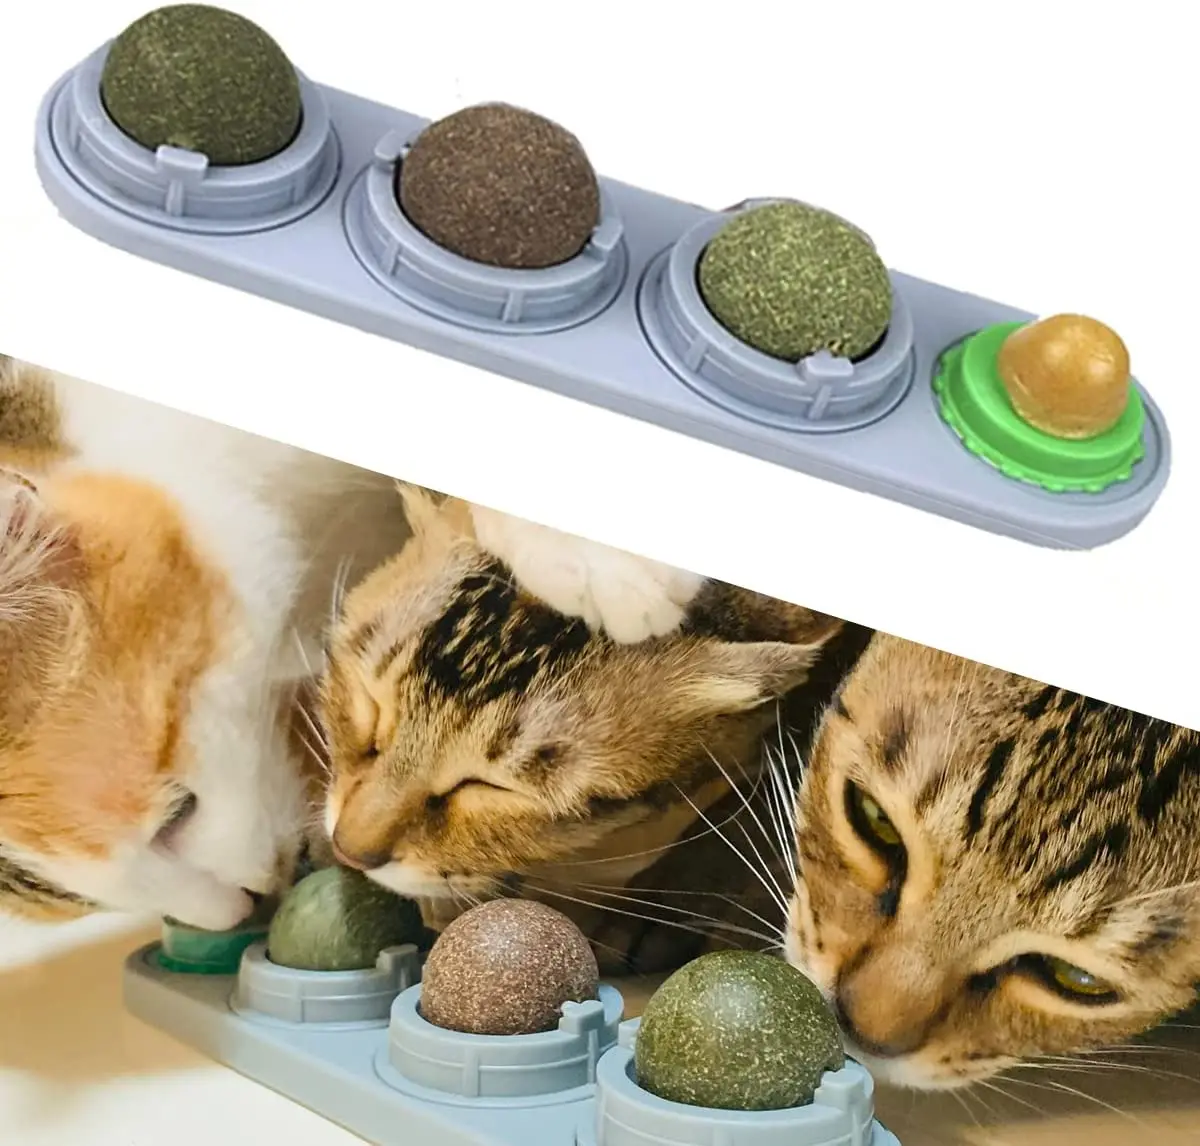 

Toys Cat Cat Lick Toys Catnip Edible Ball Kitty Healthy Cat Balls Cats Toy Silvervine Kitten Wall Safe Pet Catnip Chew Toys For